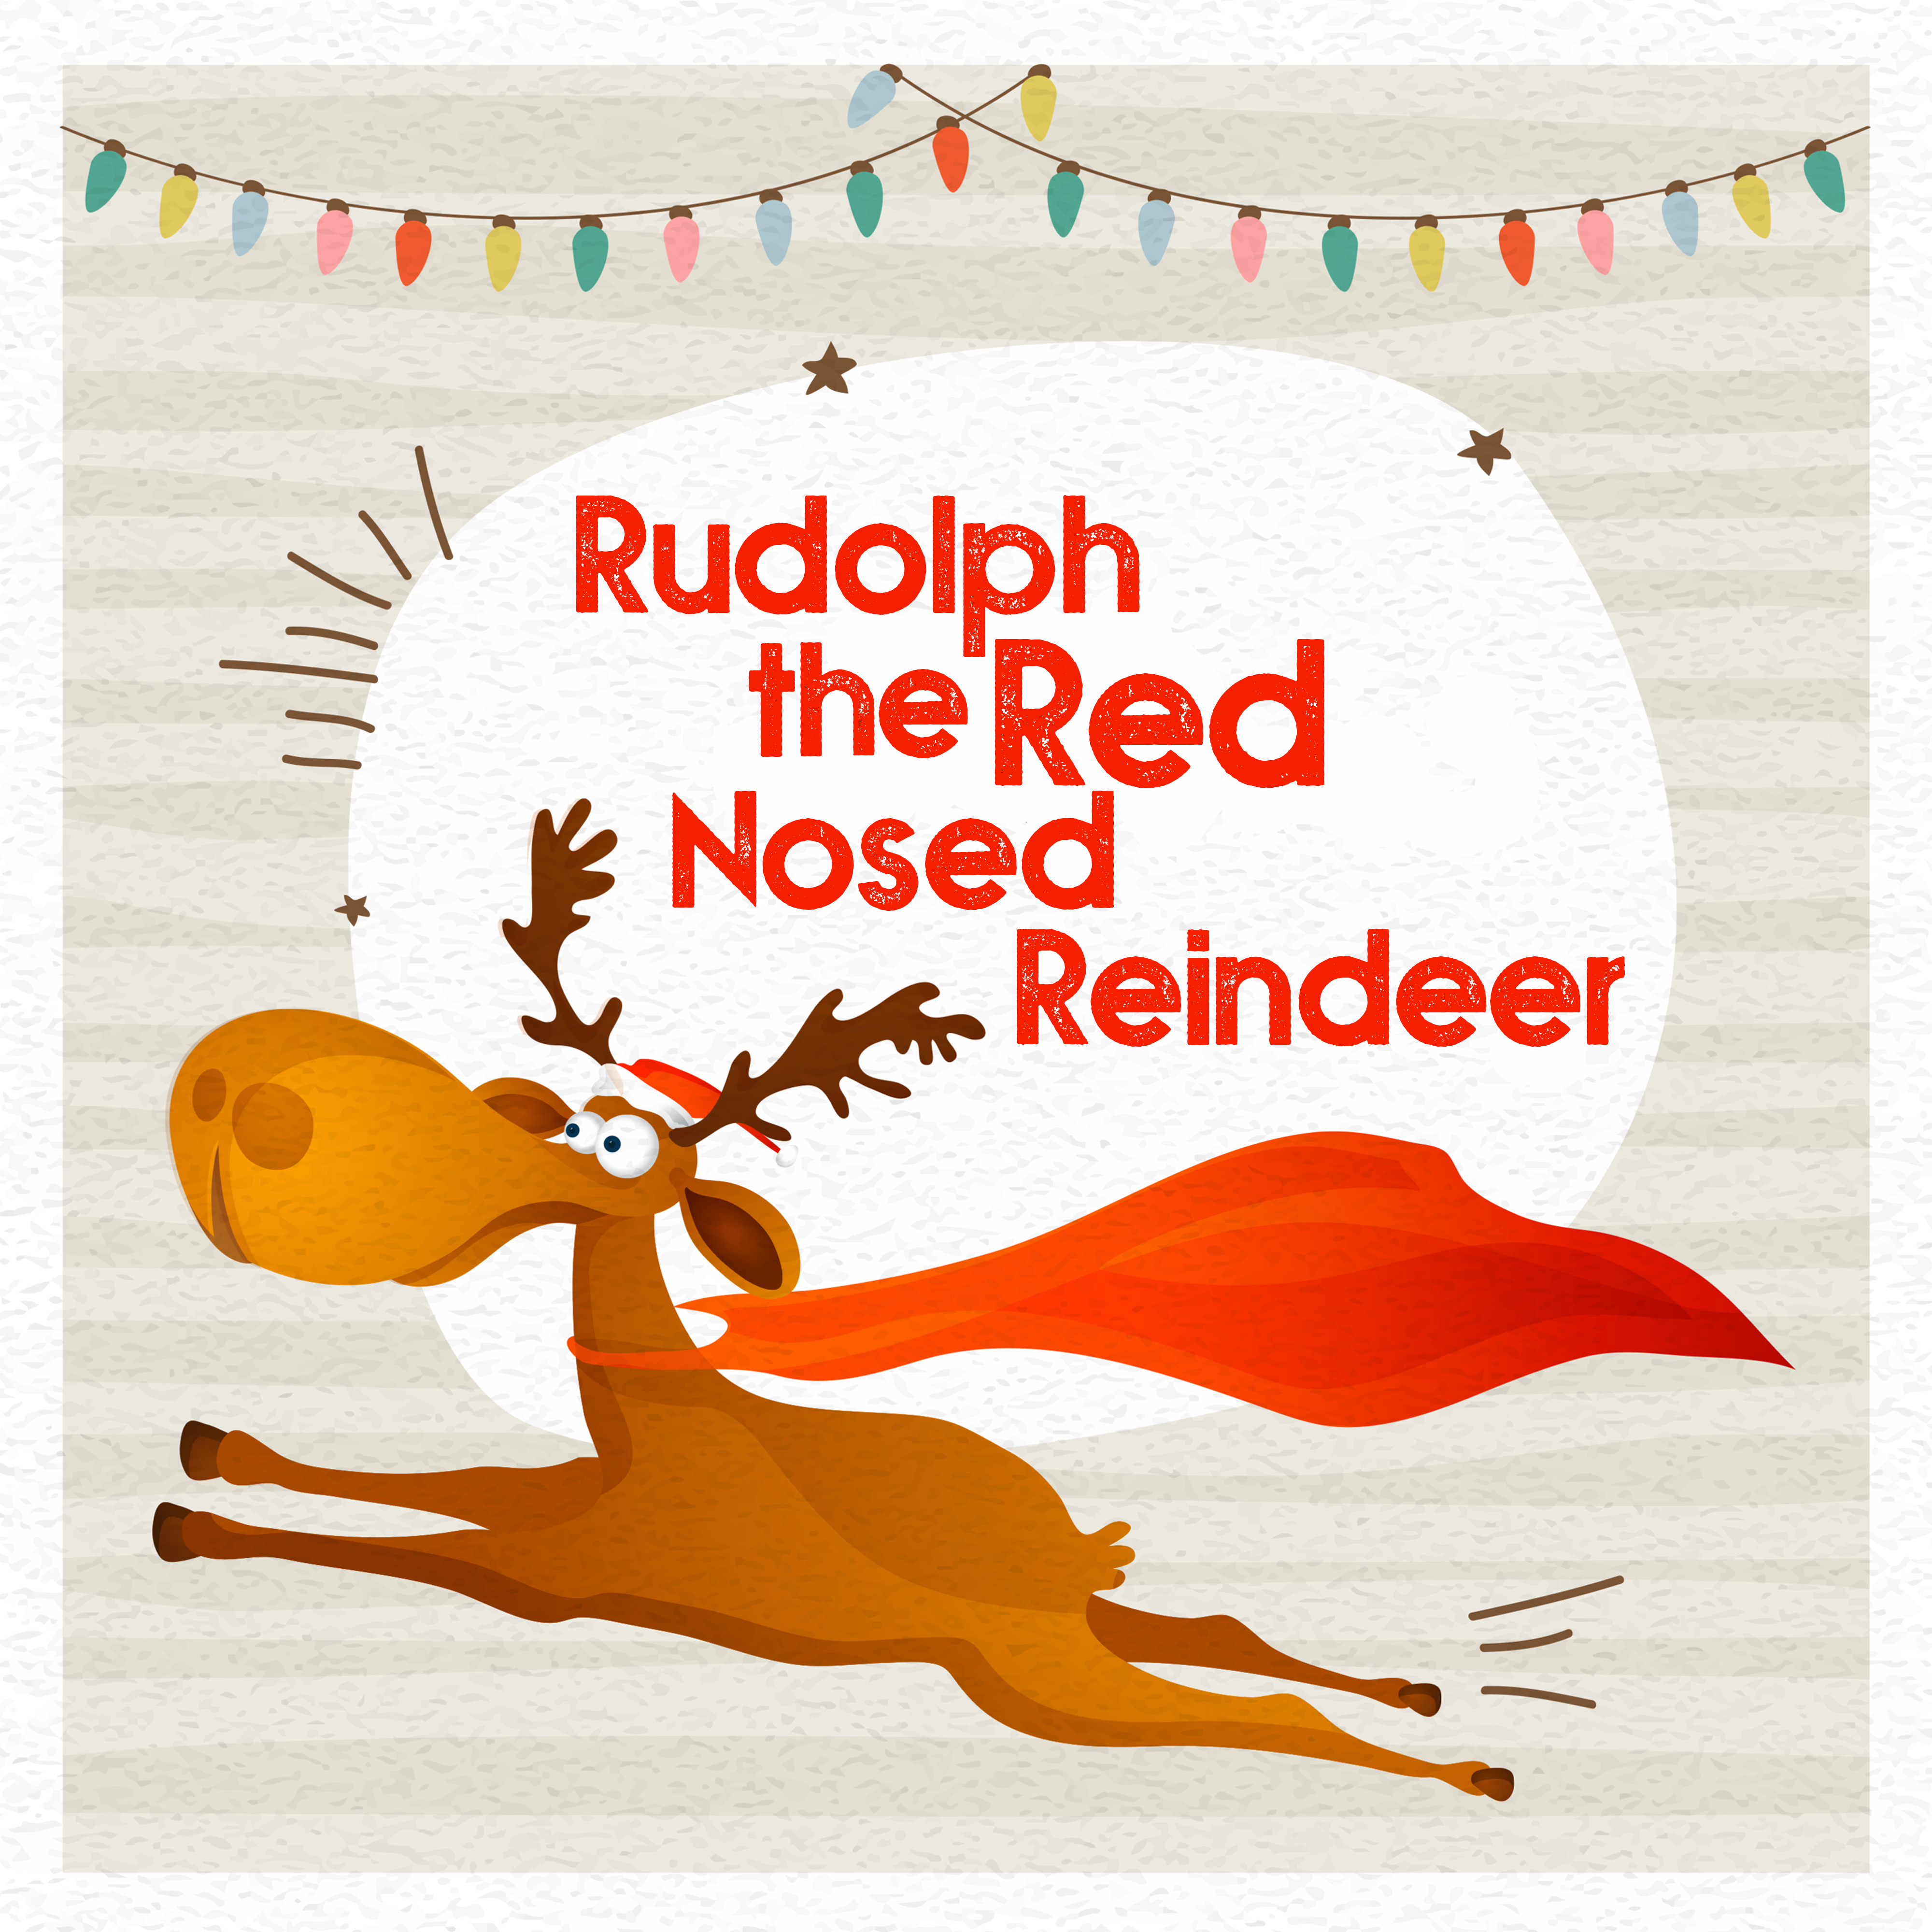 Rudolph the Red Nosed Reindeer  Beautiful Christmas Songs for Children, Traditional Carols, Happy Holidays with Family, Magic Time